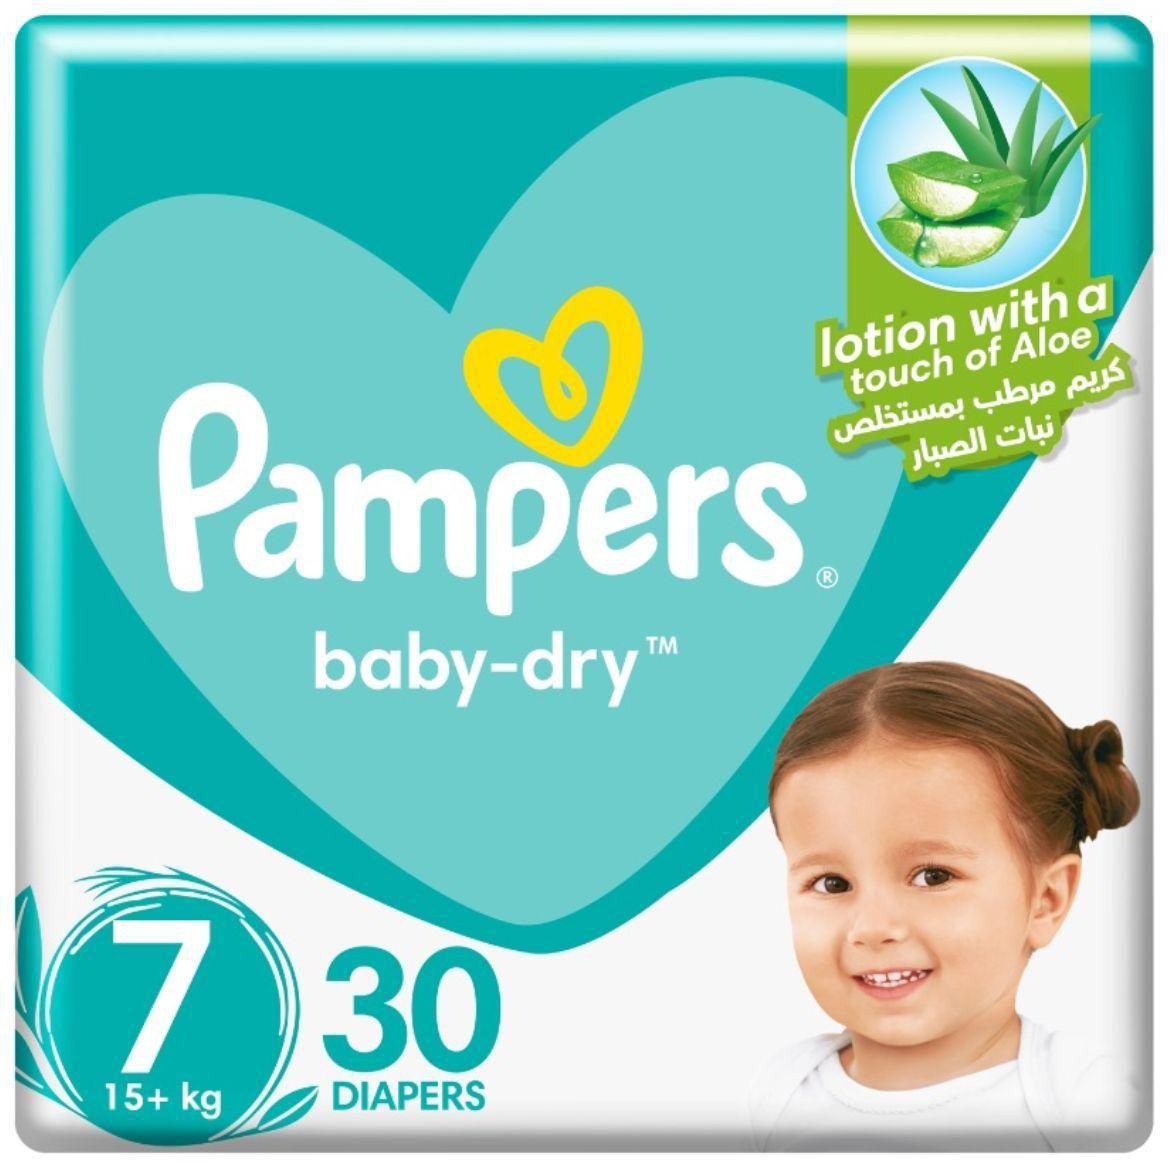 Pampers, Baby-Dry Taped Diapers, With Aloe Vera Lotion, Up To 100% Leakage Protection, Size 7, 15+Kg - 30 Pcs